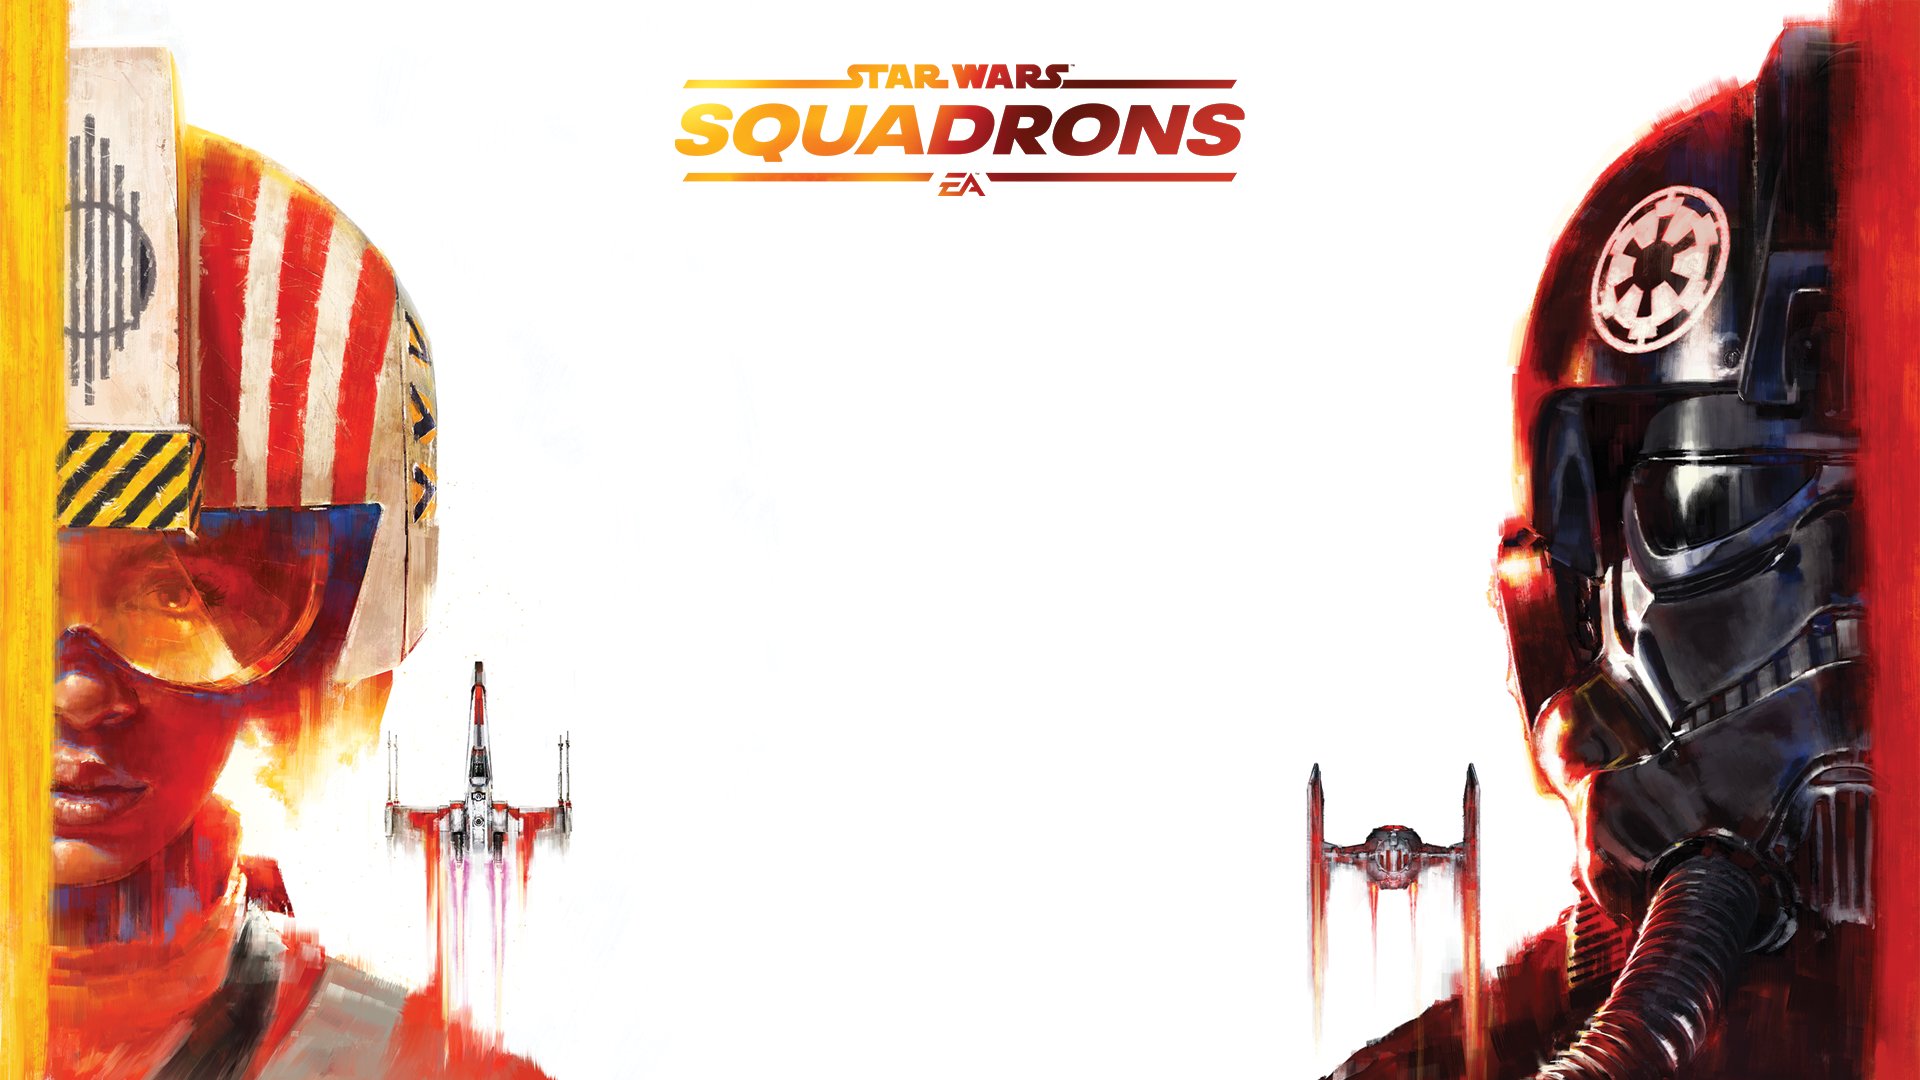 Ea Star Wars Twitterren Excited About Starwarssquadrons We Ve Got Some Official Video Chat Backgrounds Just For You Check Them Out Here T Co Rc3dfbdqwb T Co Aya7j3hke9 Twitter